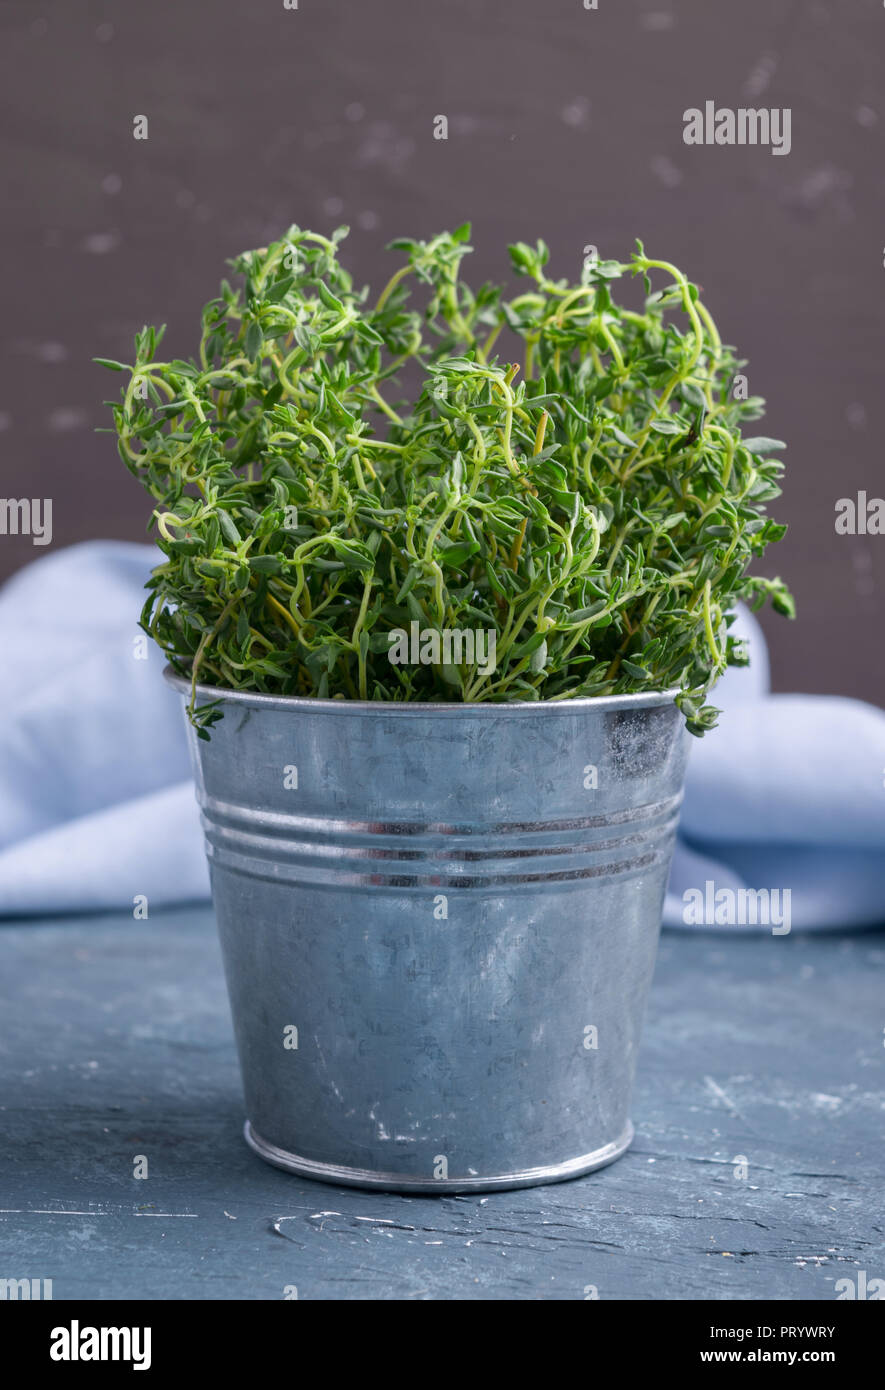 Thyme plant in small decorative metal bucket. Fresh herbs for cooking. Stock Photo